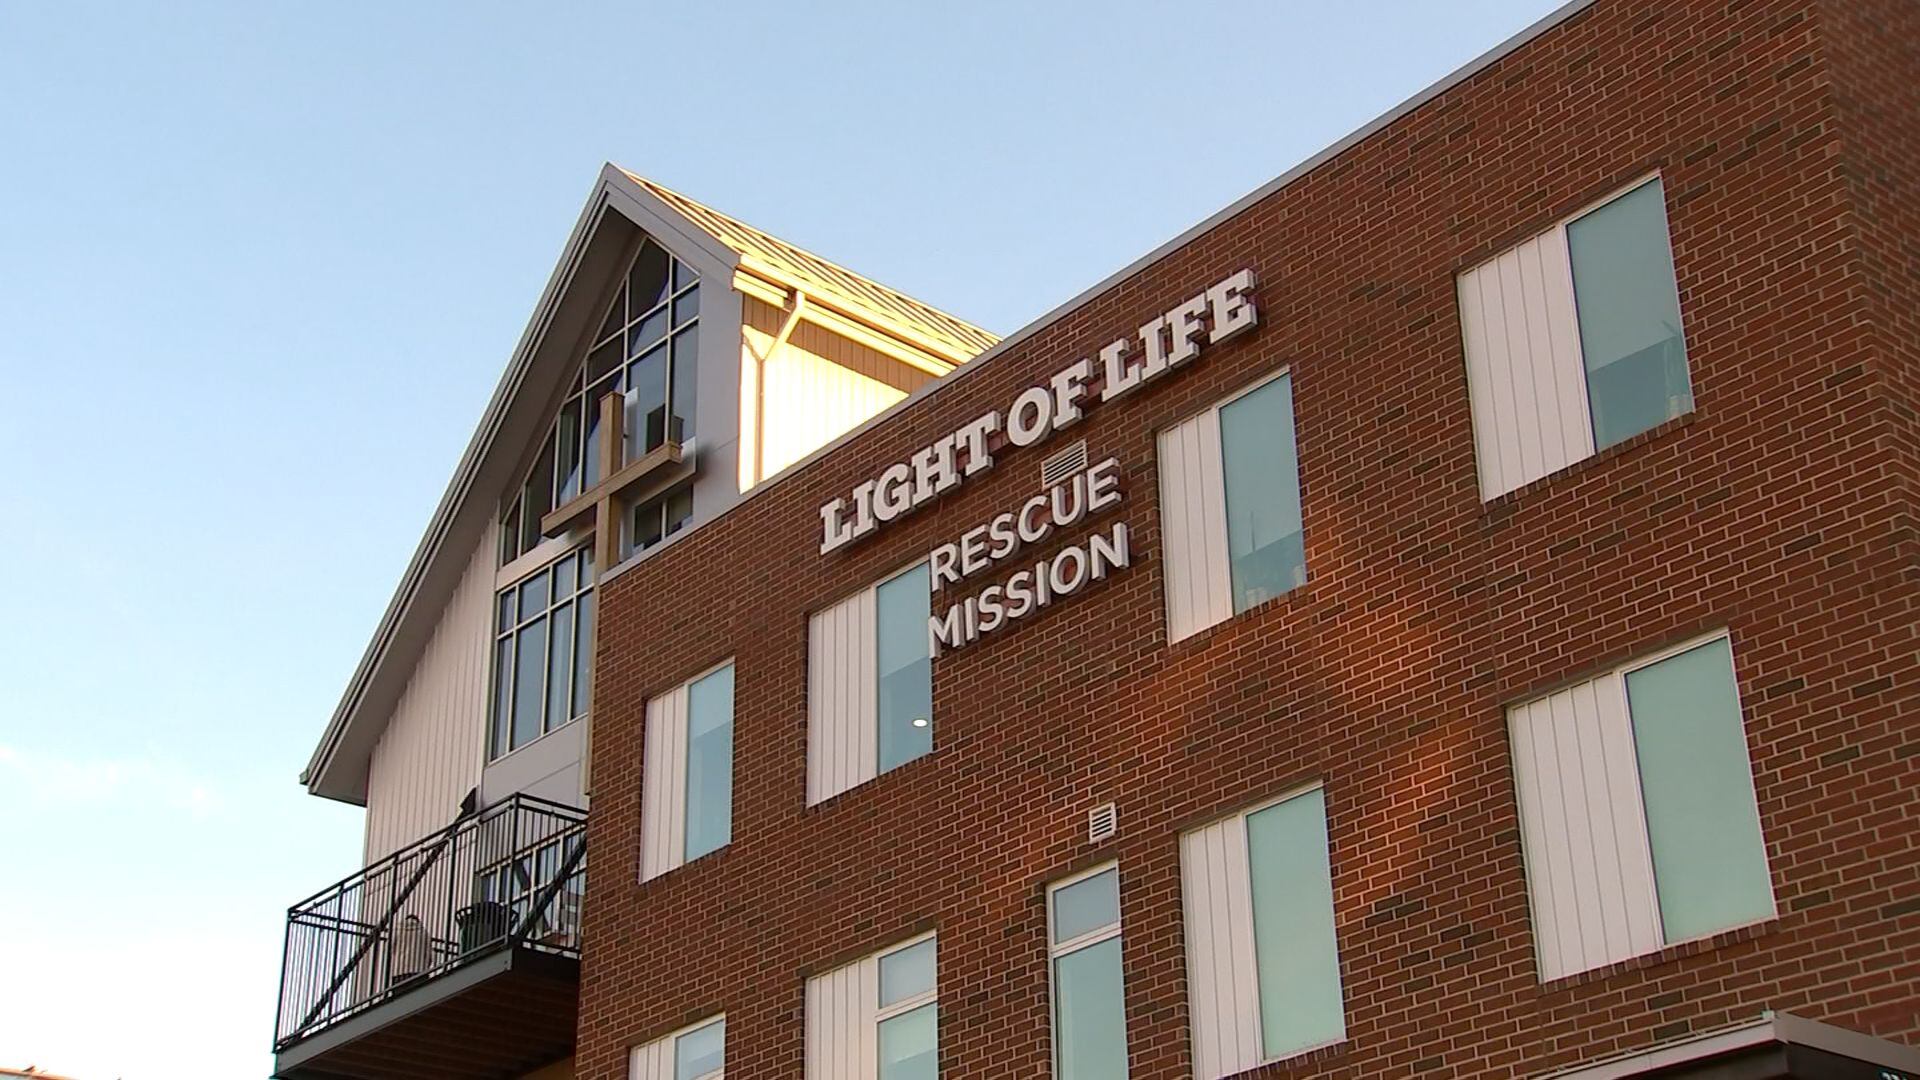 Light of Life Rescue Mission named Bank of America's 2023